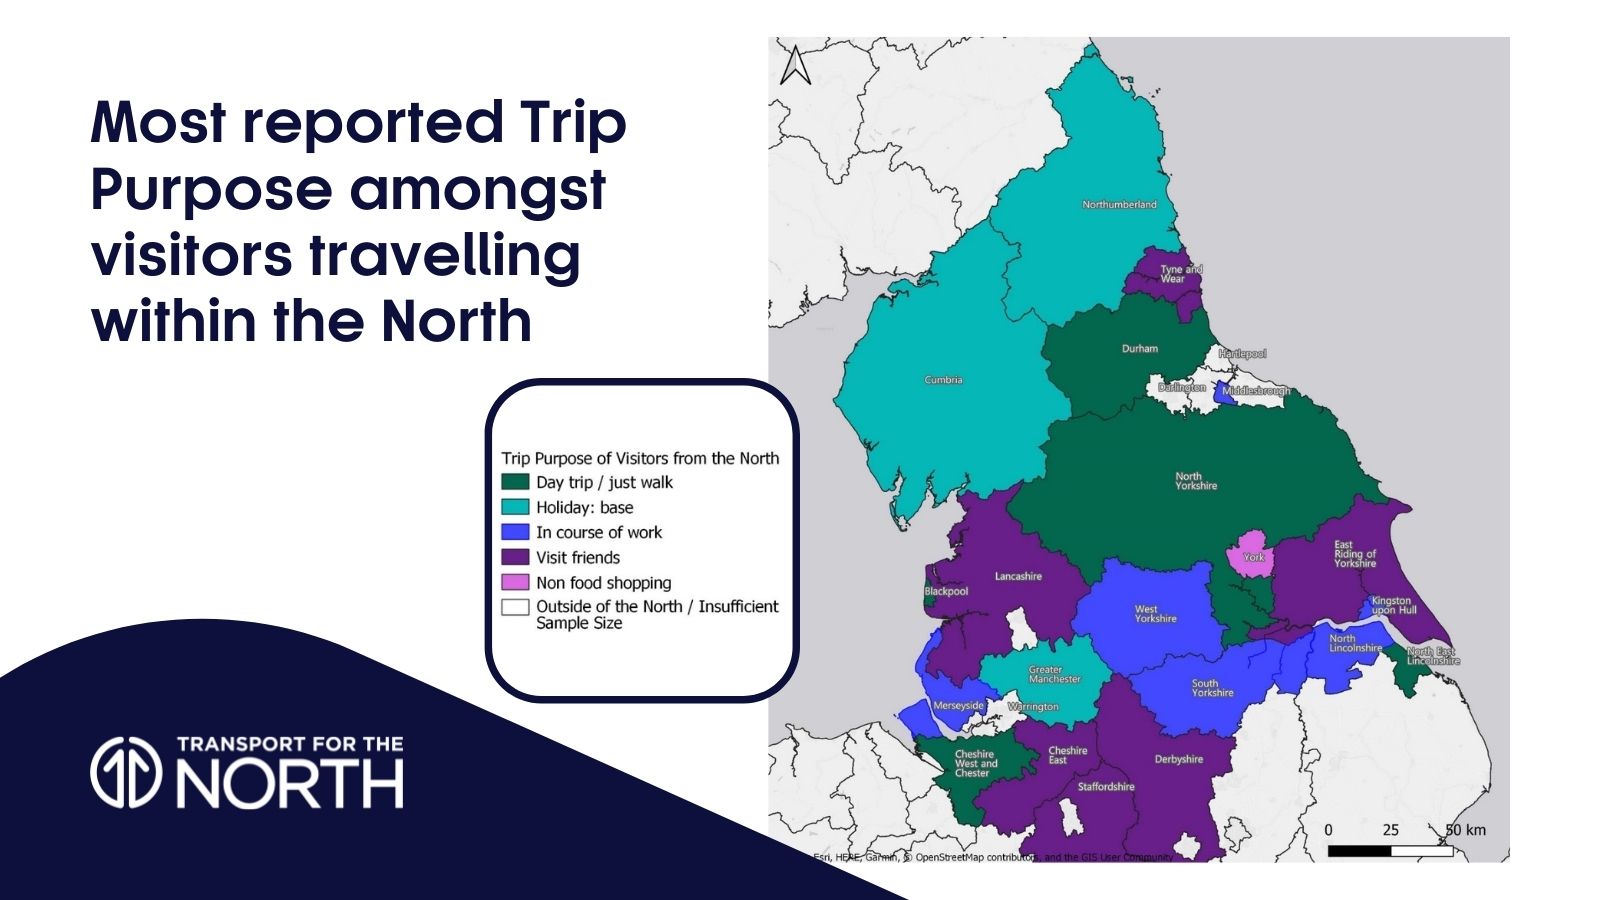 Most reported Trip Purpose amongst visitors travelling within the North